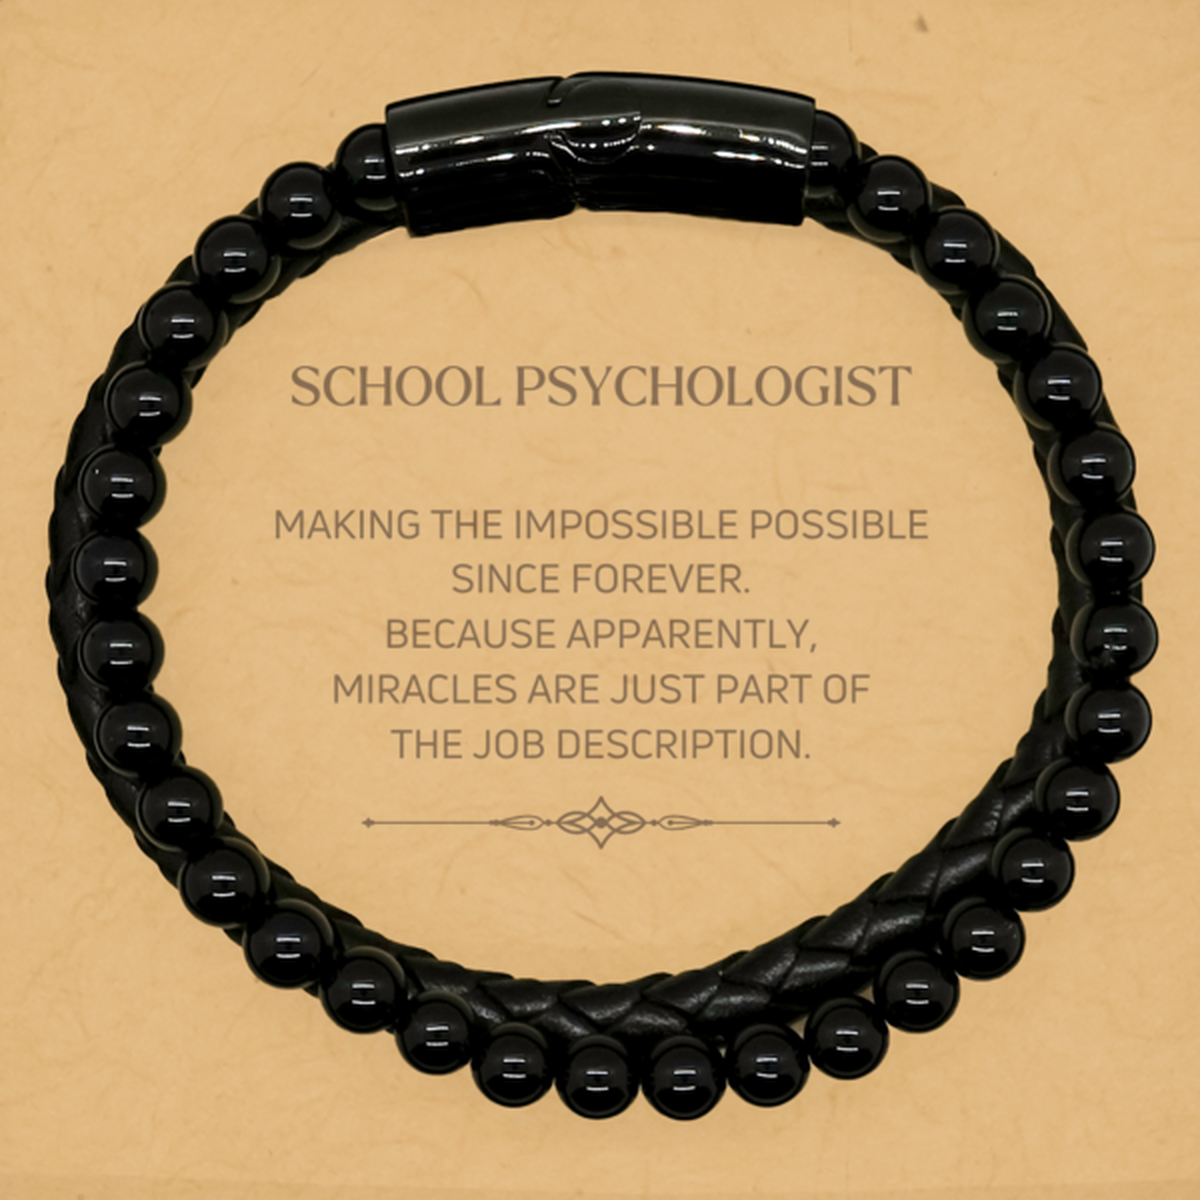 Funny School Psychologist Gifts, Miracles are just part of the job description, Inspirational Birthday Stone Leather Bracelets For School Psychologist, Men, Women, Coworkers, Friends, Boss